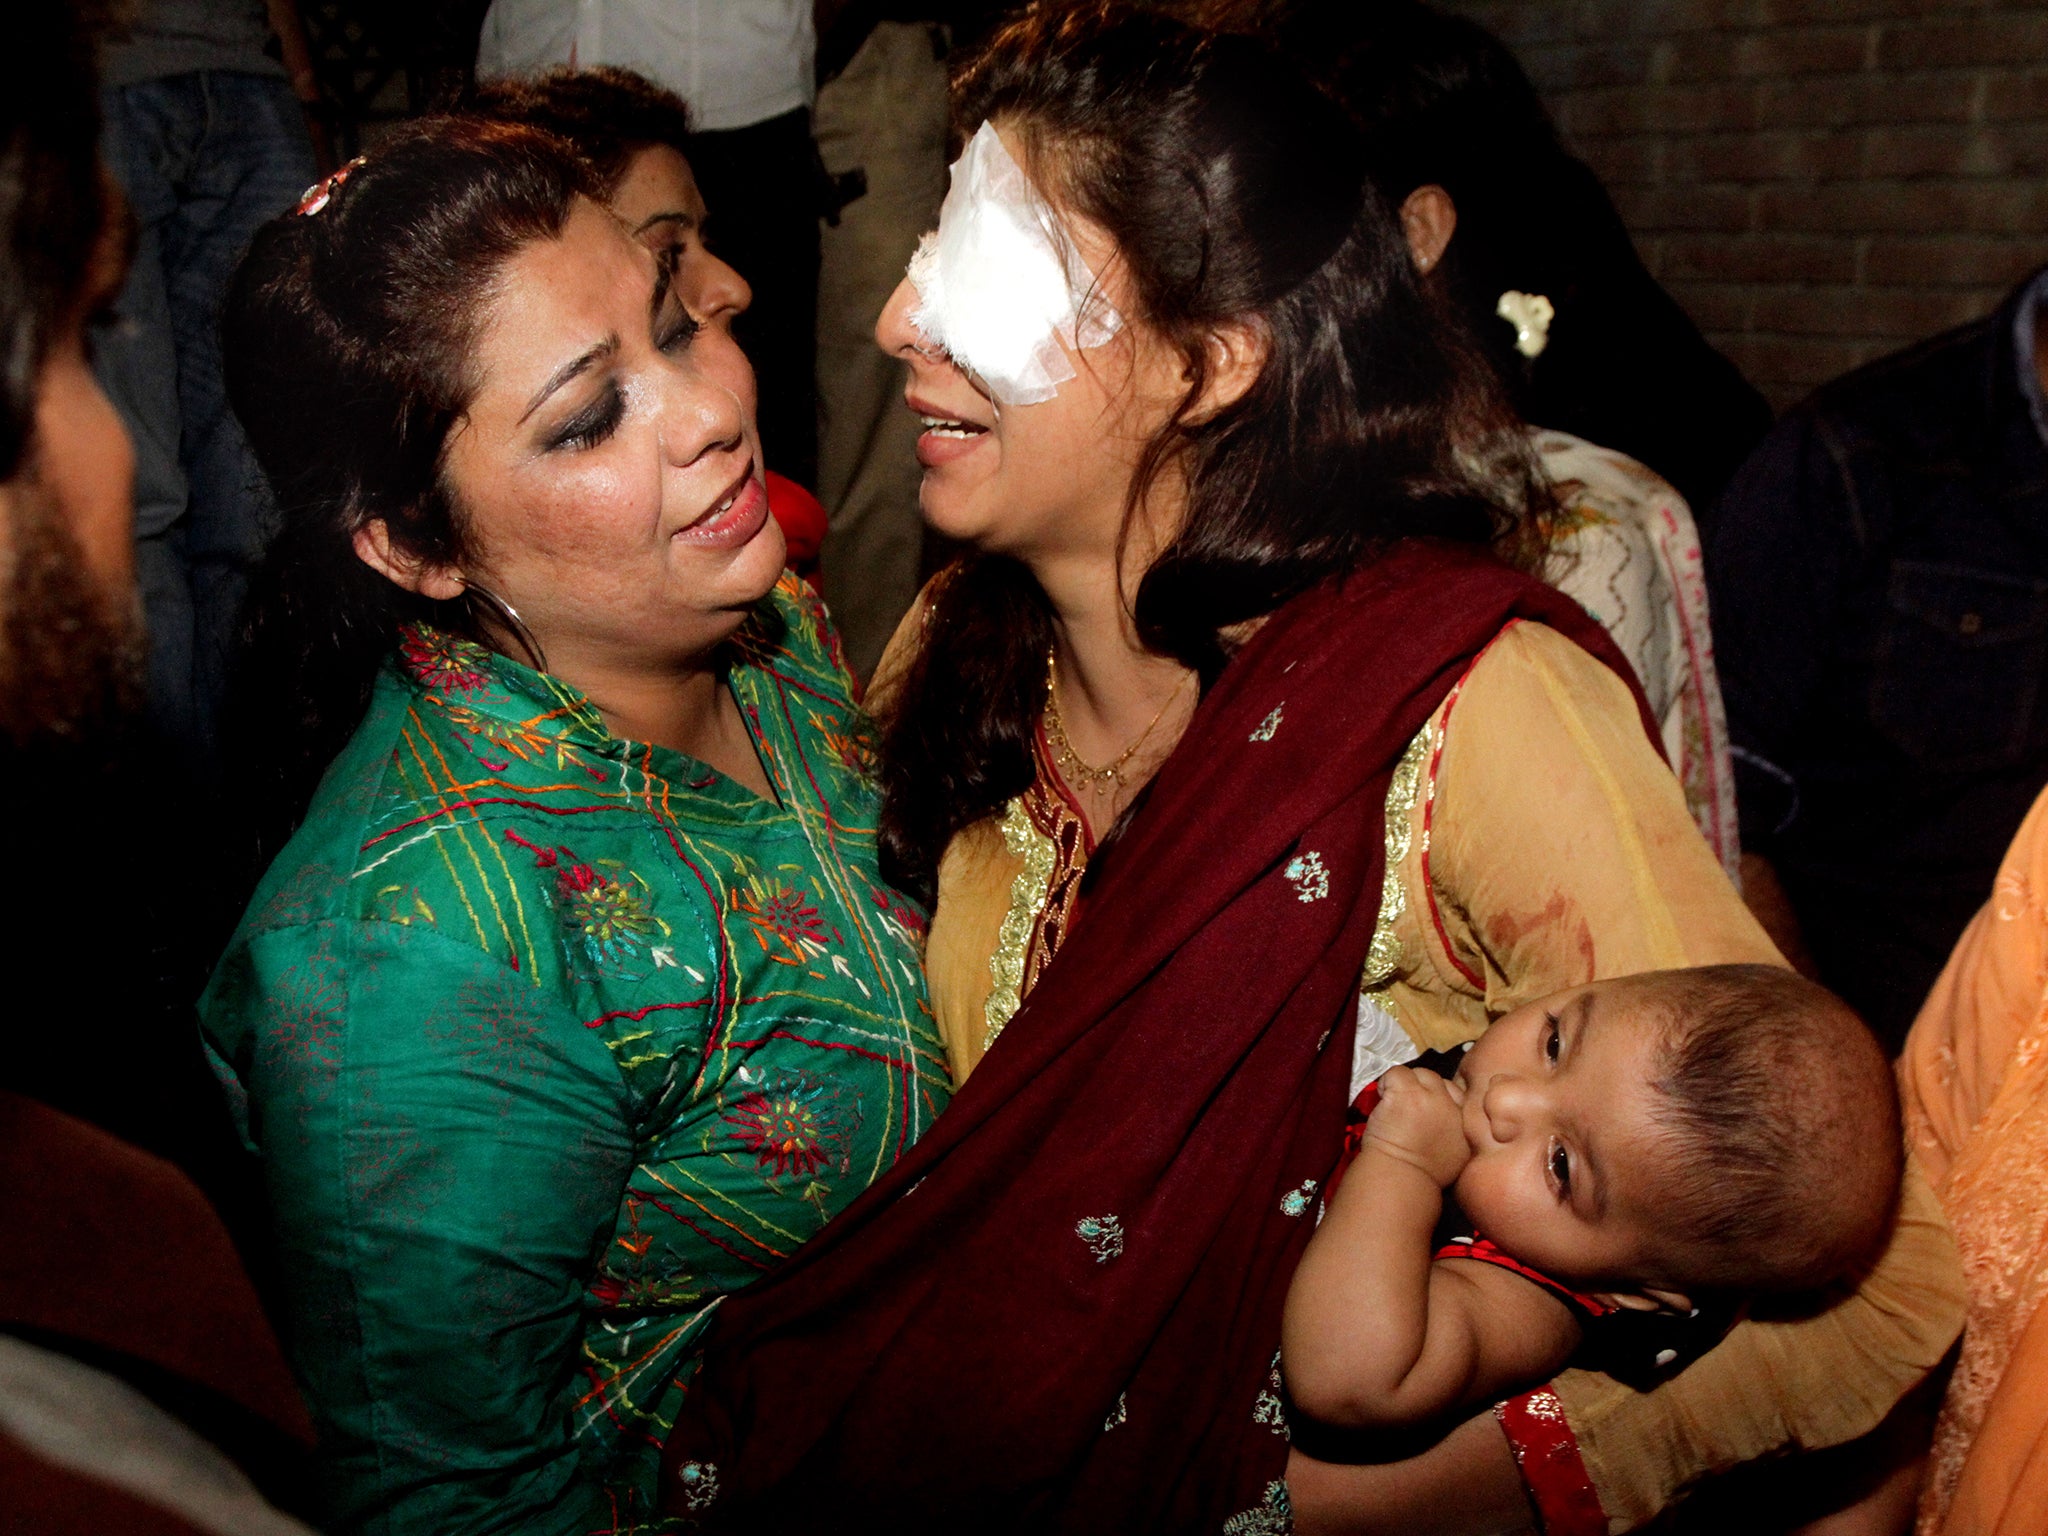 A woman injured in the bomb blast is comforted by a family member at a local hospital in Lahore, Pakistan